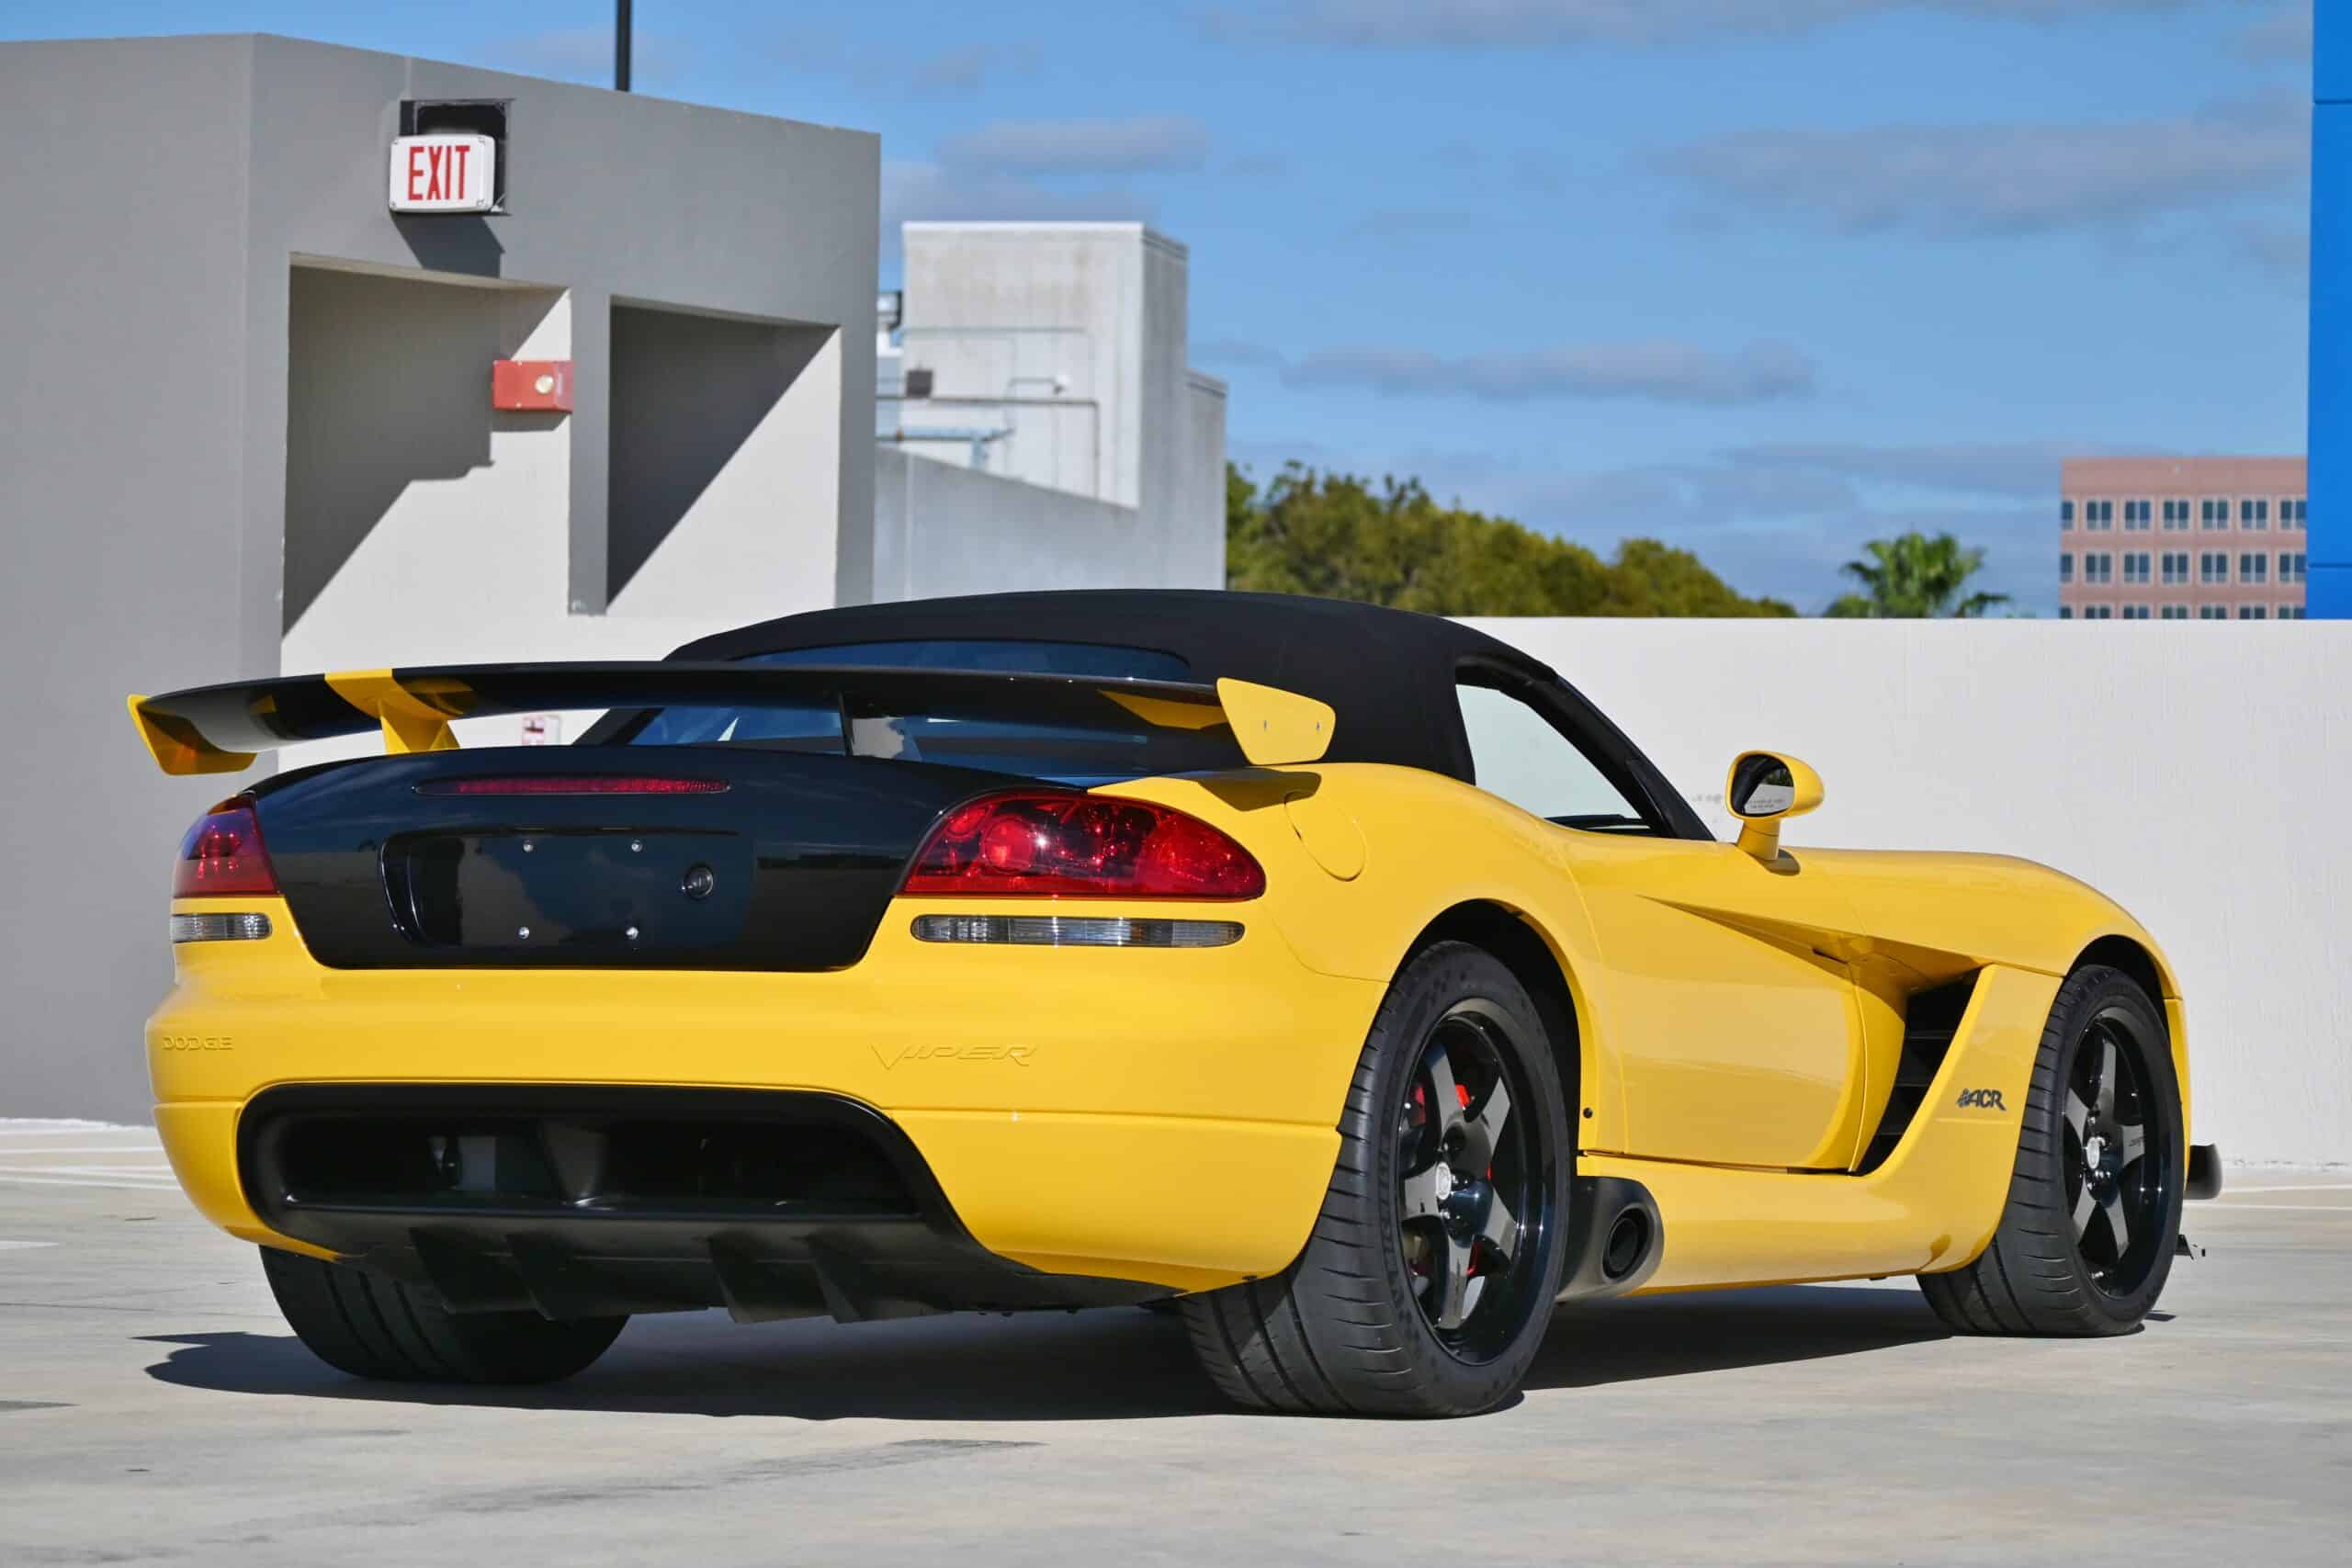 2010 Dodge Viper ACR SRT 10 Roadster 1 of 3 Yellow ACR Convertibles- Original Window Sticker- only 2k Miles -LIKE NEW